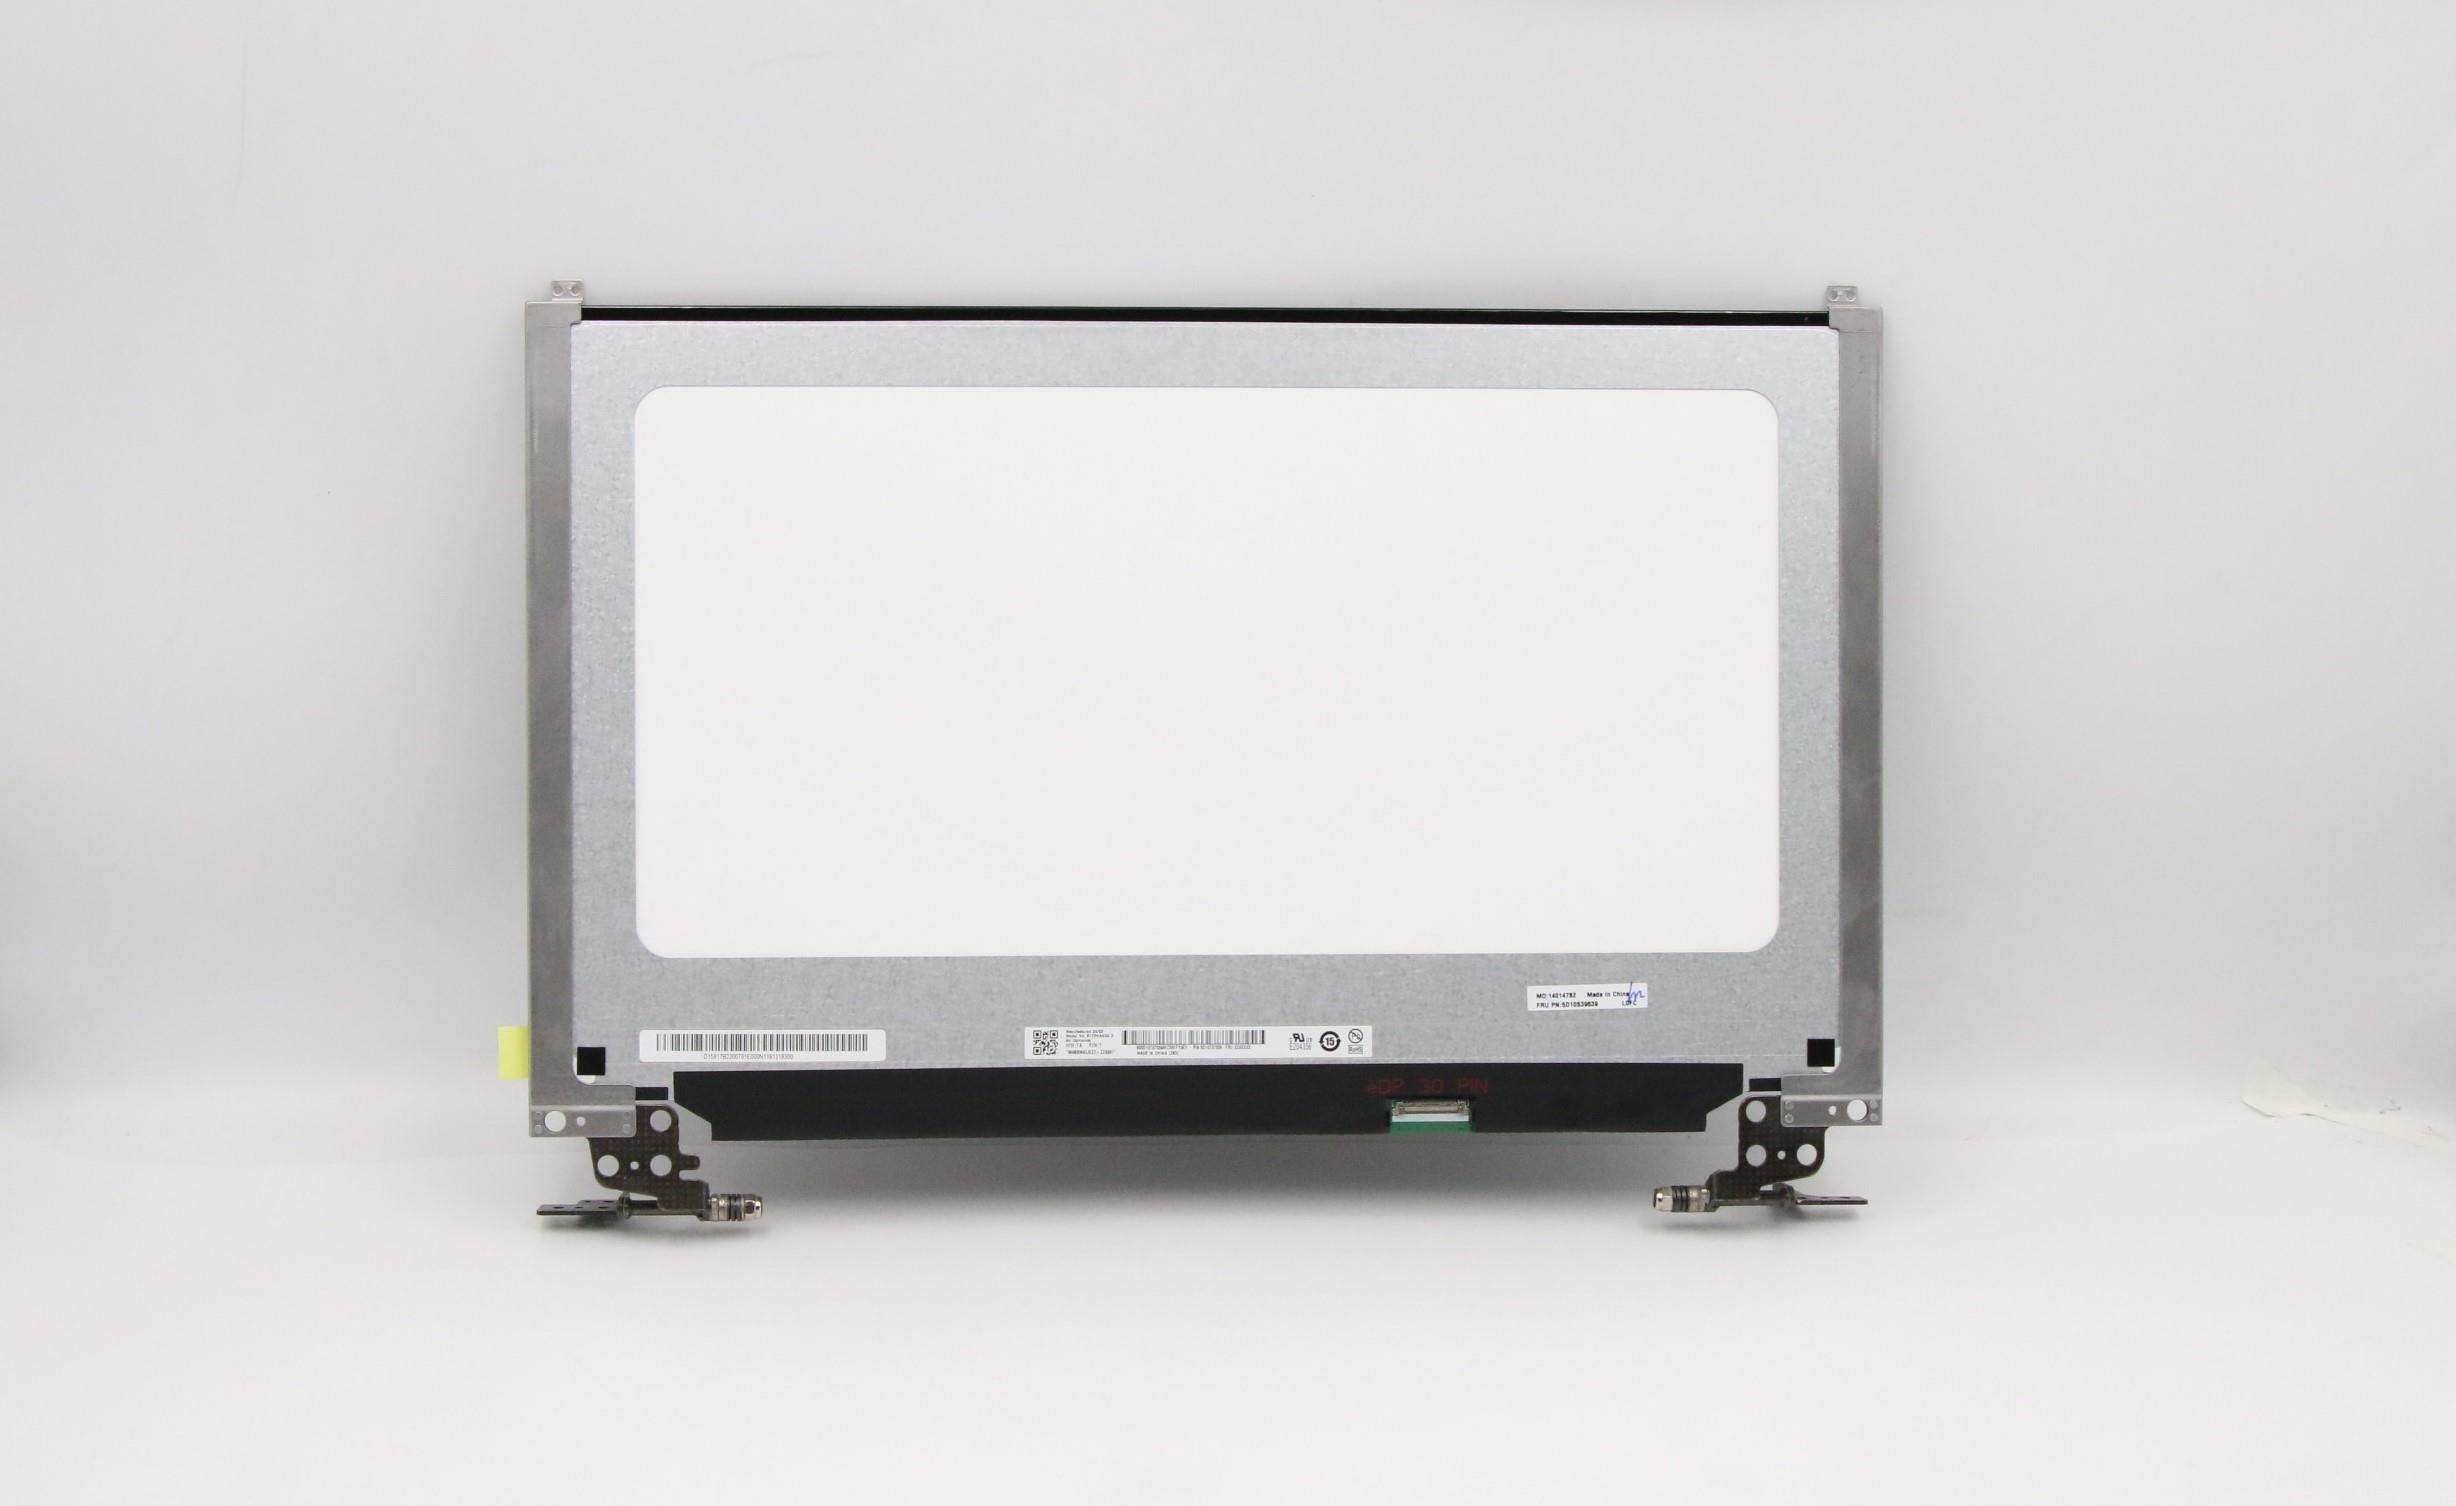 Lenovo Part  Original Lenovo LCD Assembly, 17.3", FHD, Non-Touch, Anti-Glare, IPS, 300nit, 72%NTSC, 81WC FHD